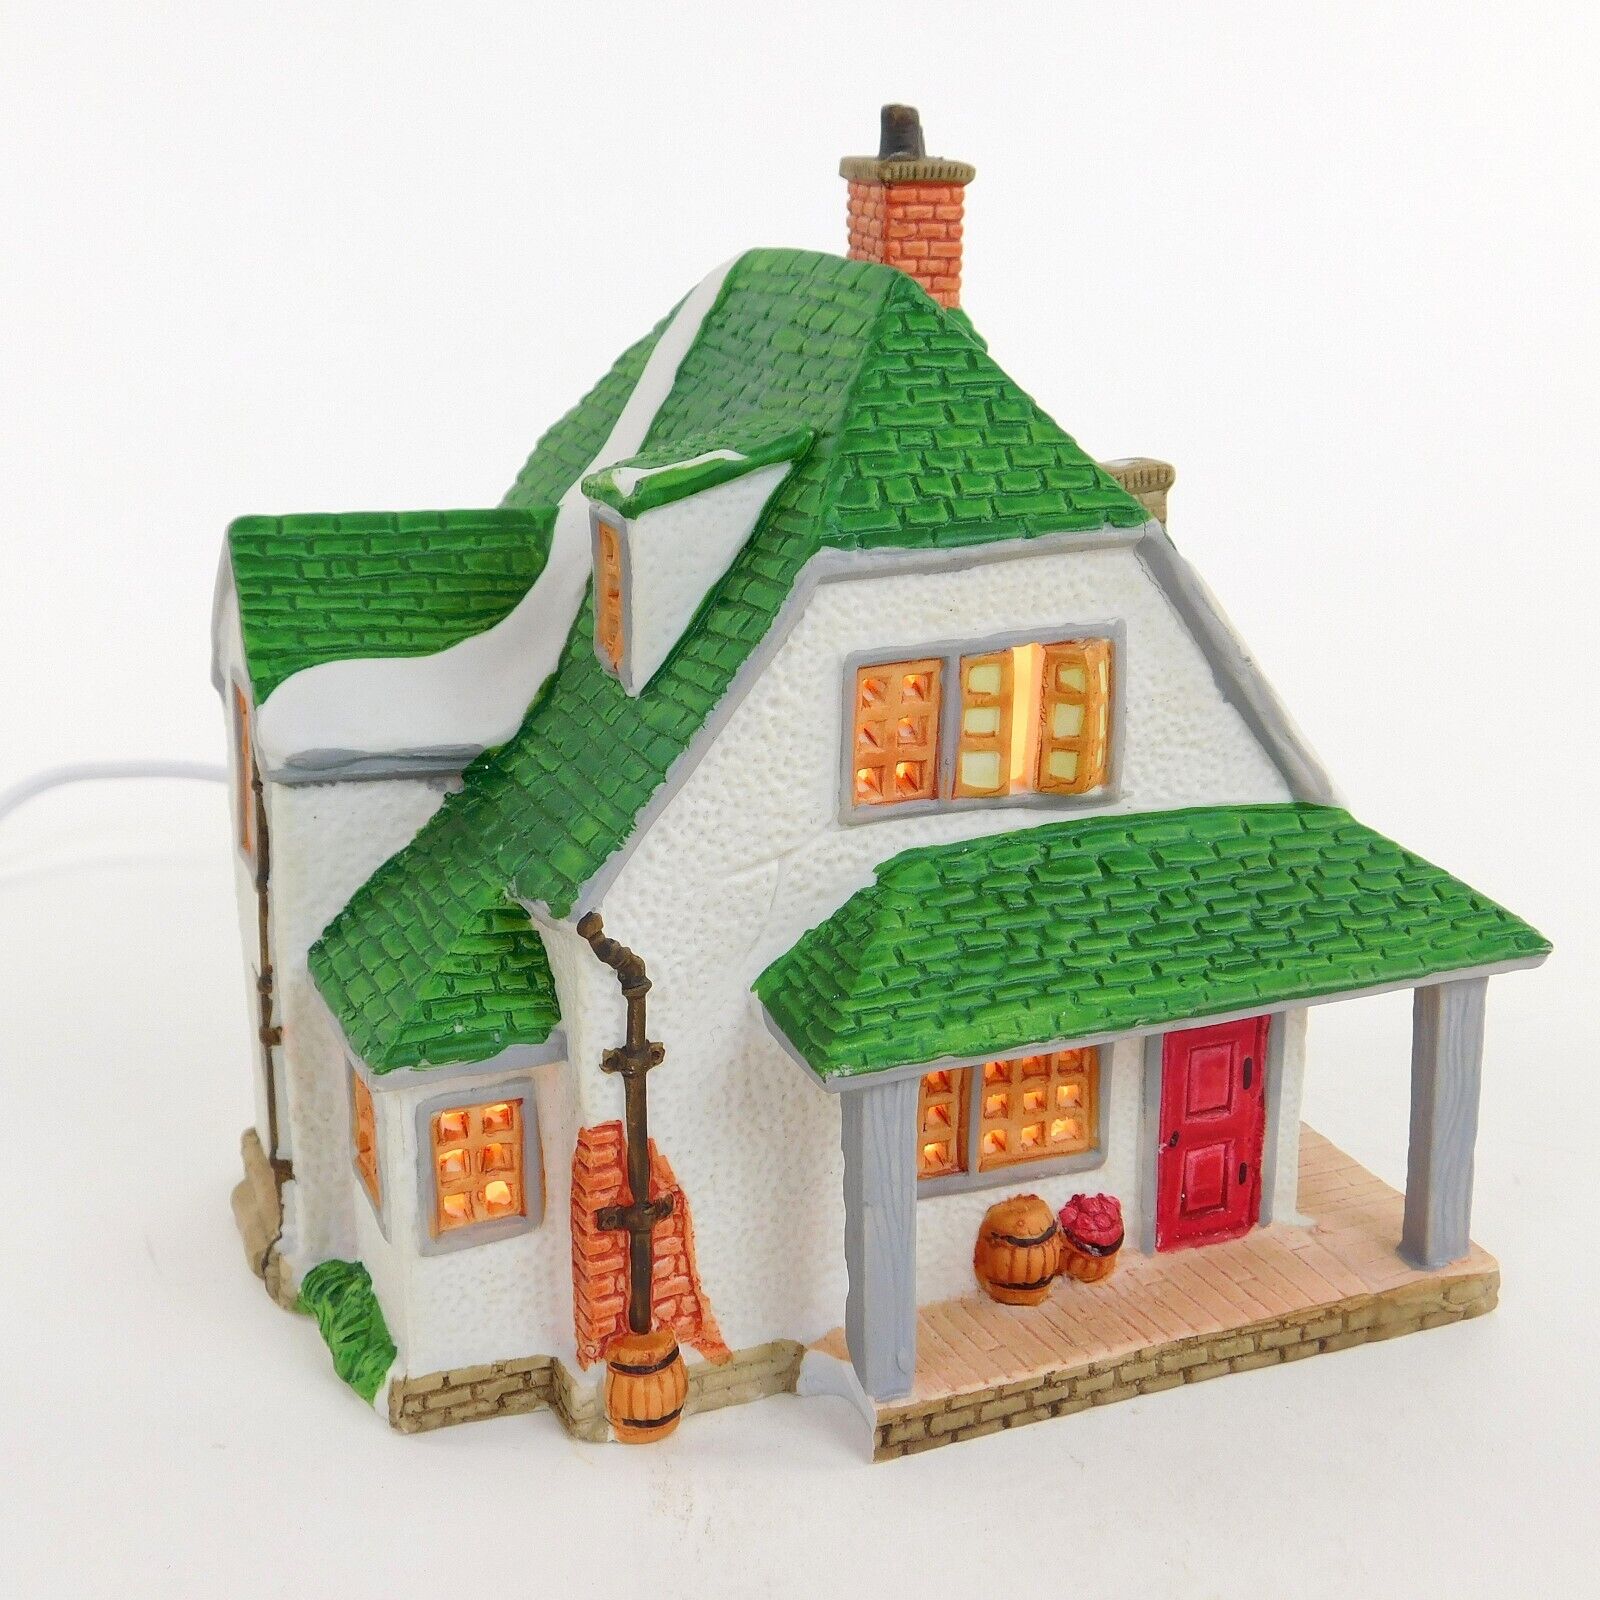 1994 Lemax Dickensvale Porcelain Lighted House w Light Cord #45127